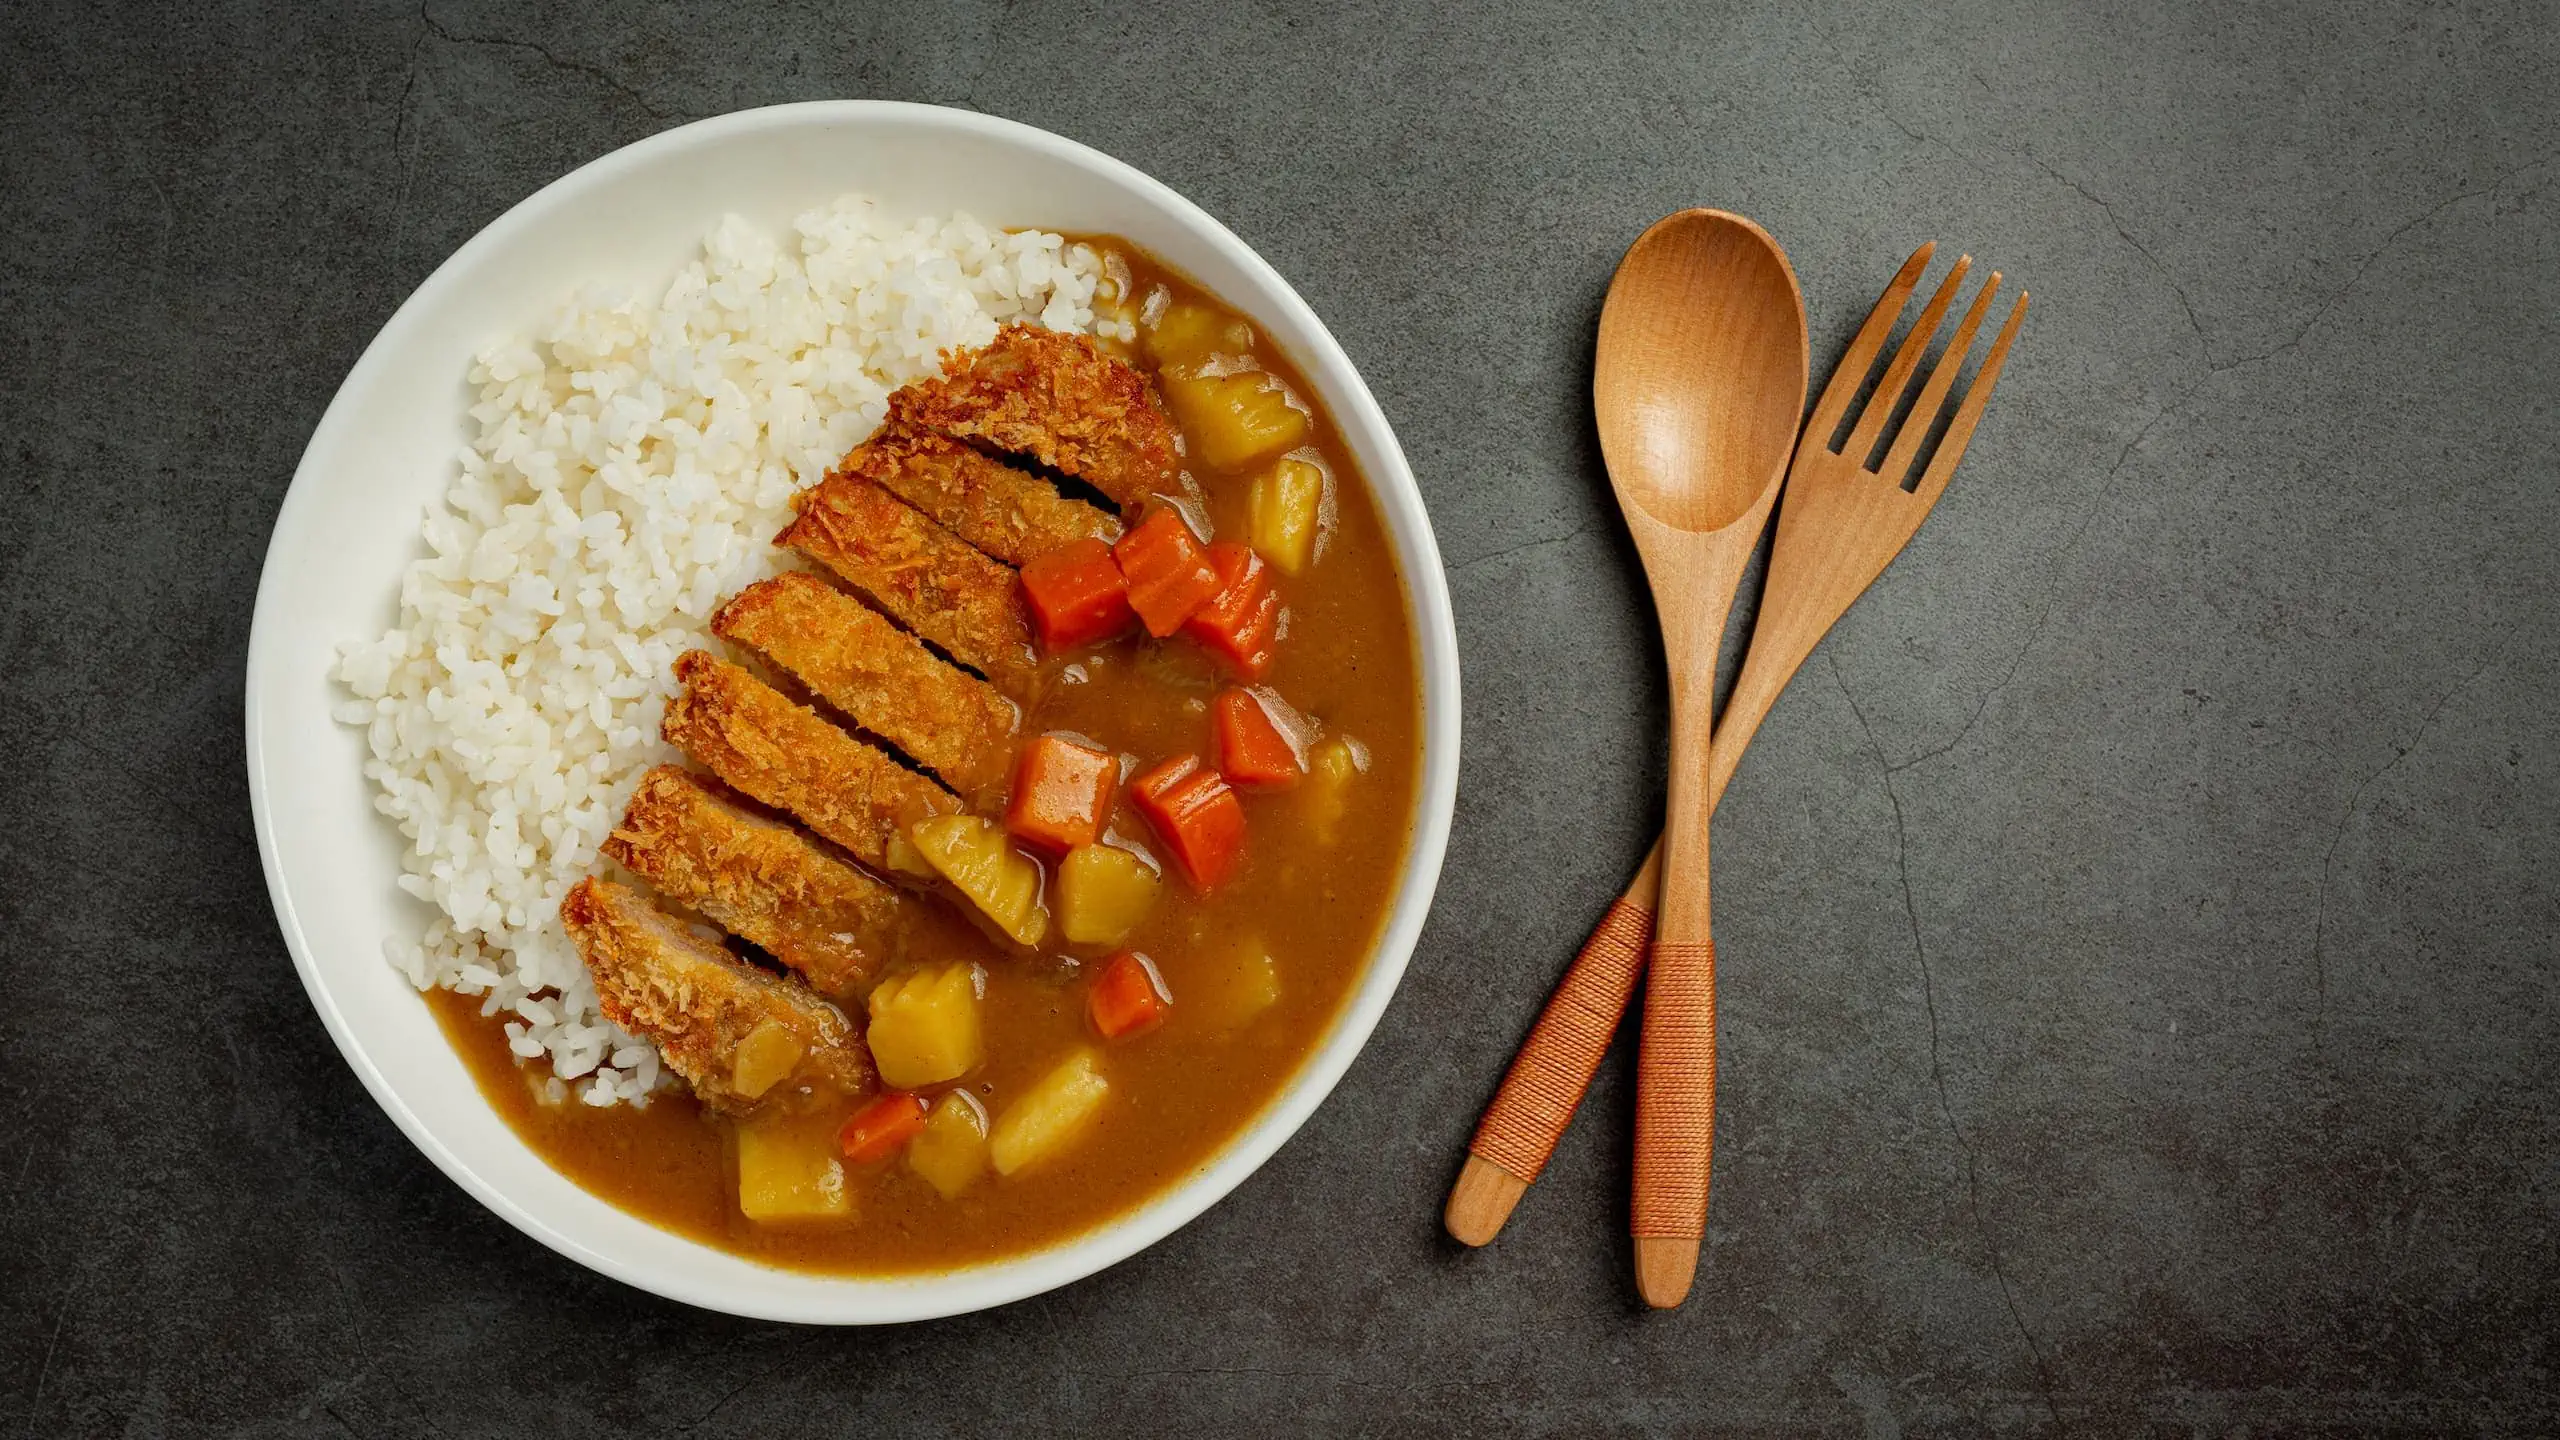 Our Coco's curry with fried chicken cutlet and rice